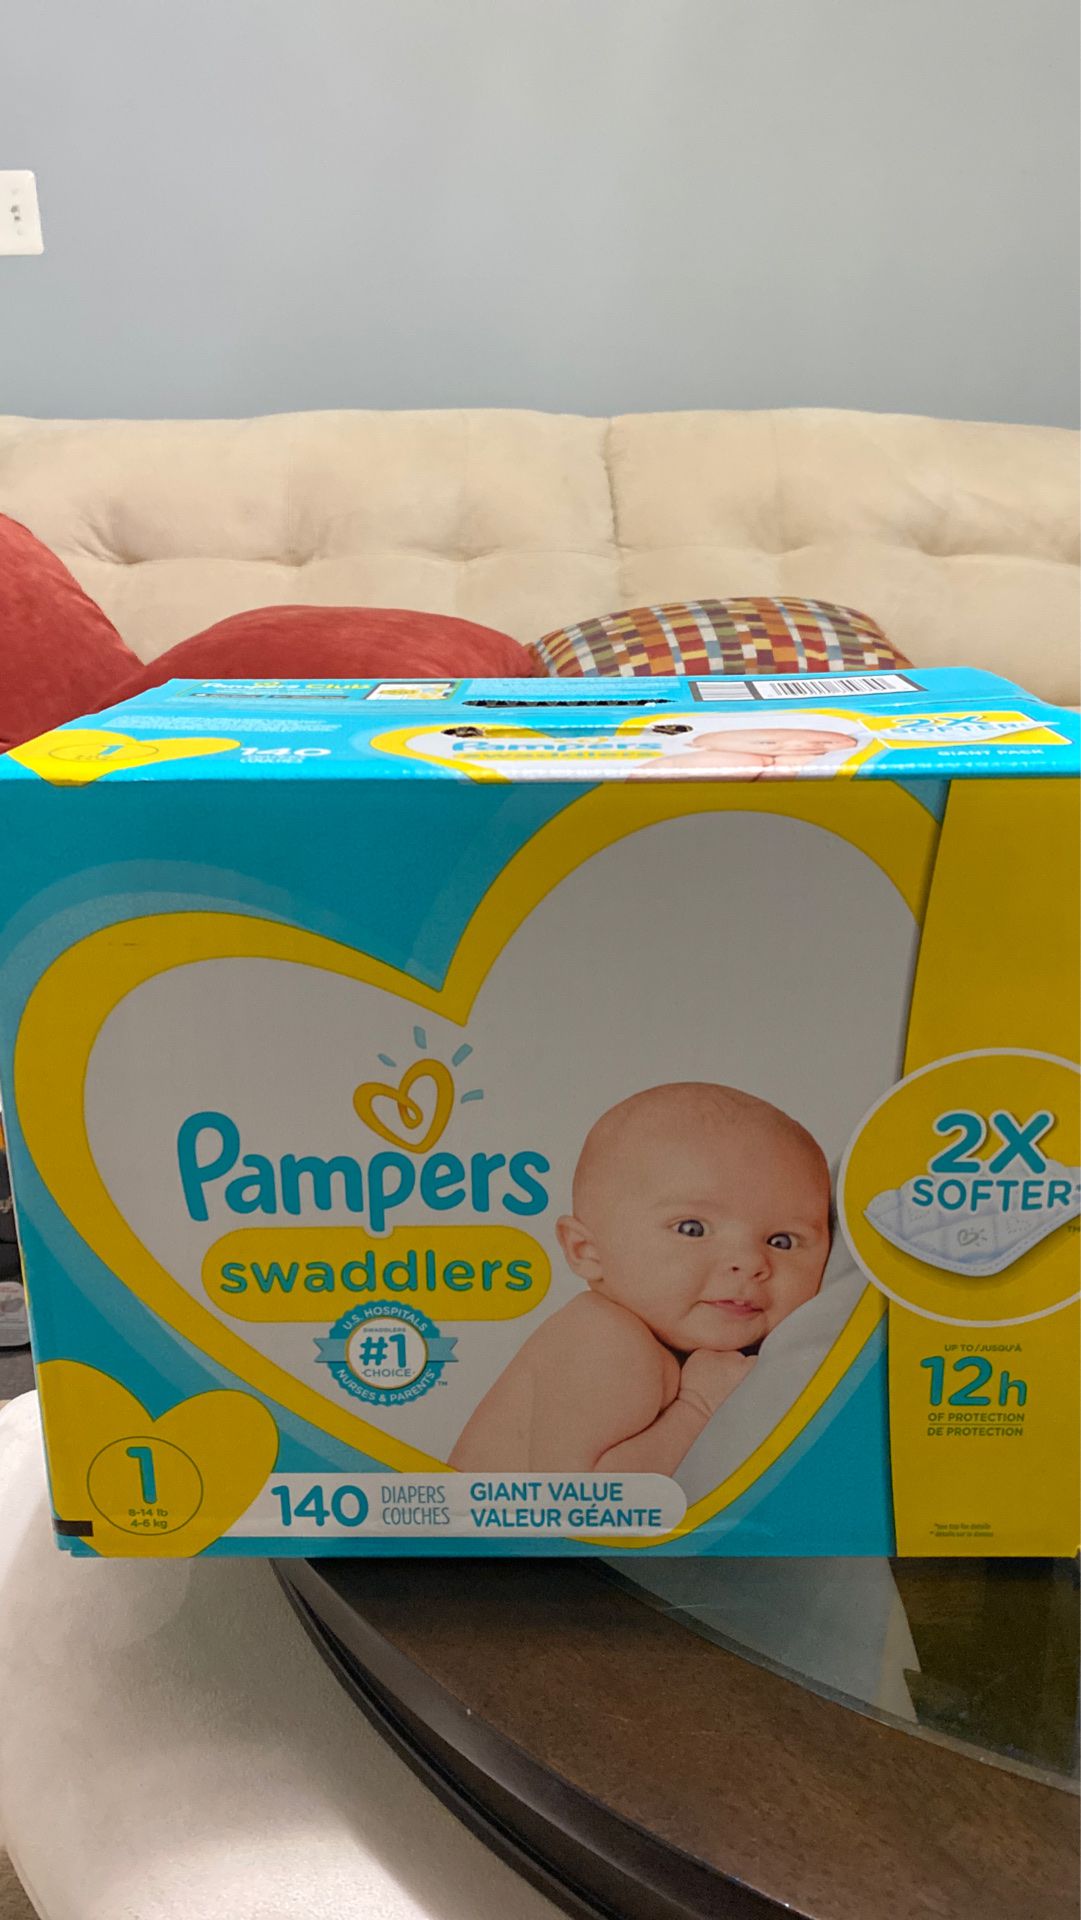 Pampers Swaddlers Diapers 140 count Size 1 - Unopened new box